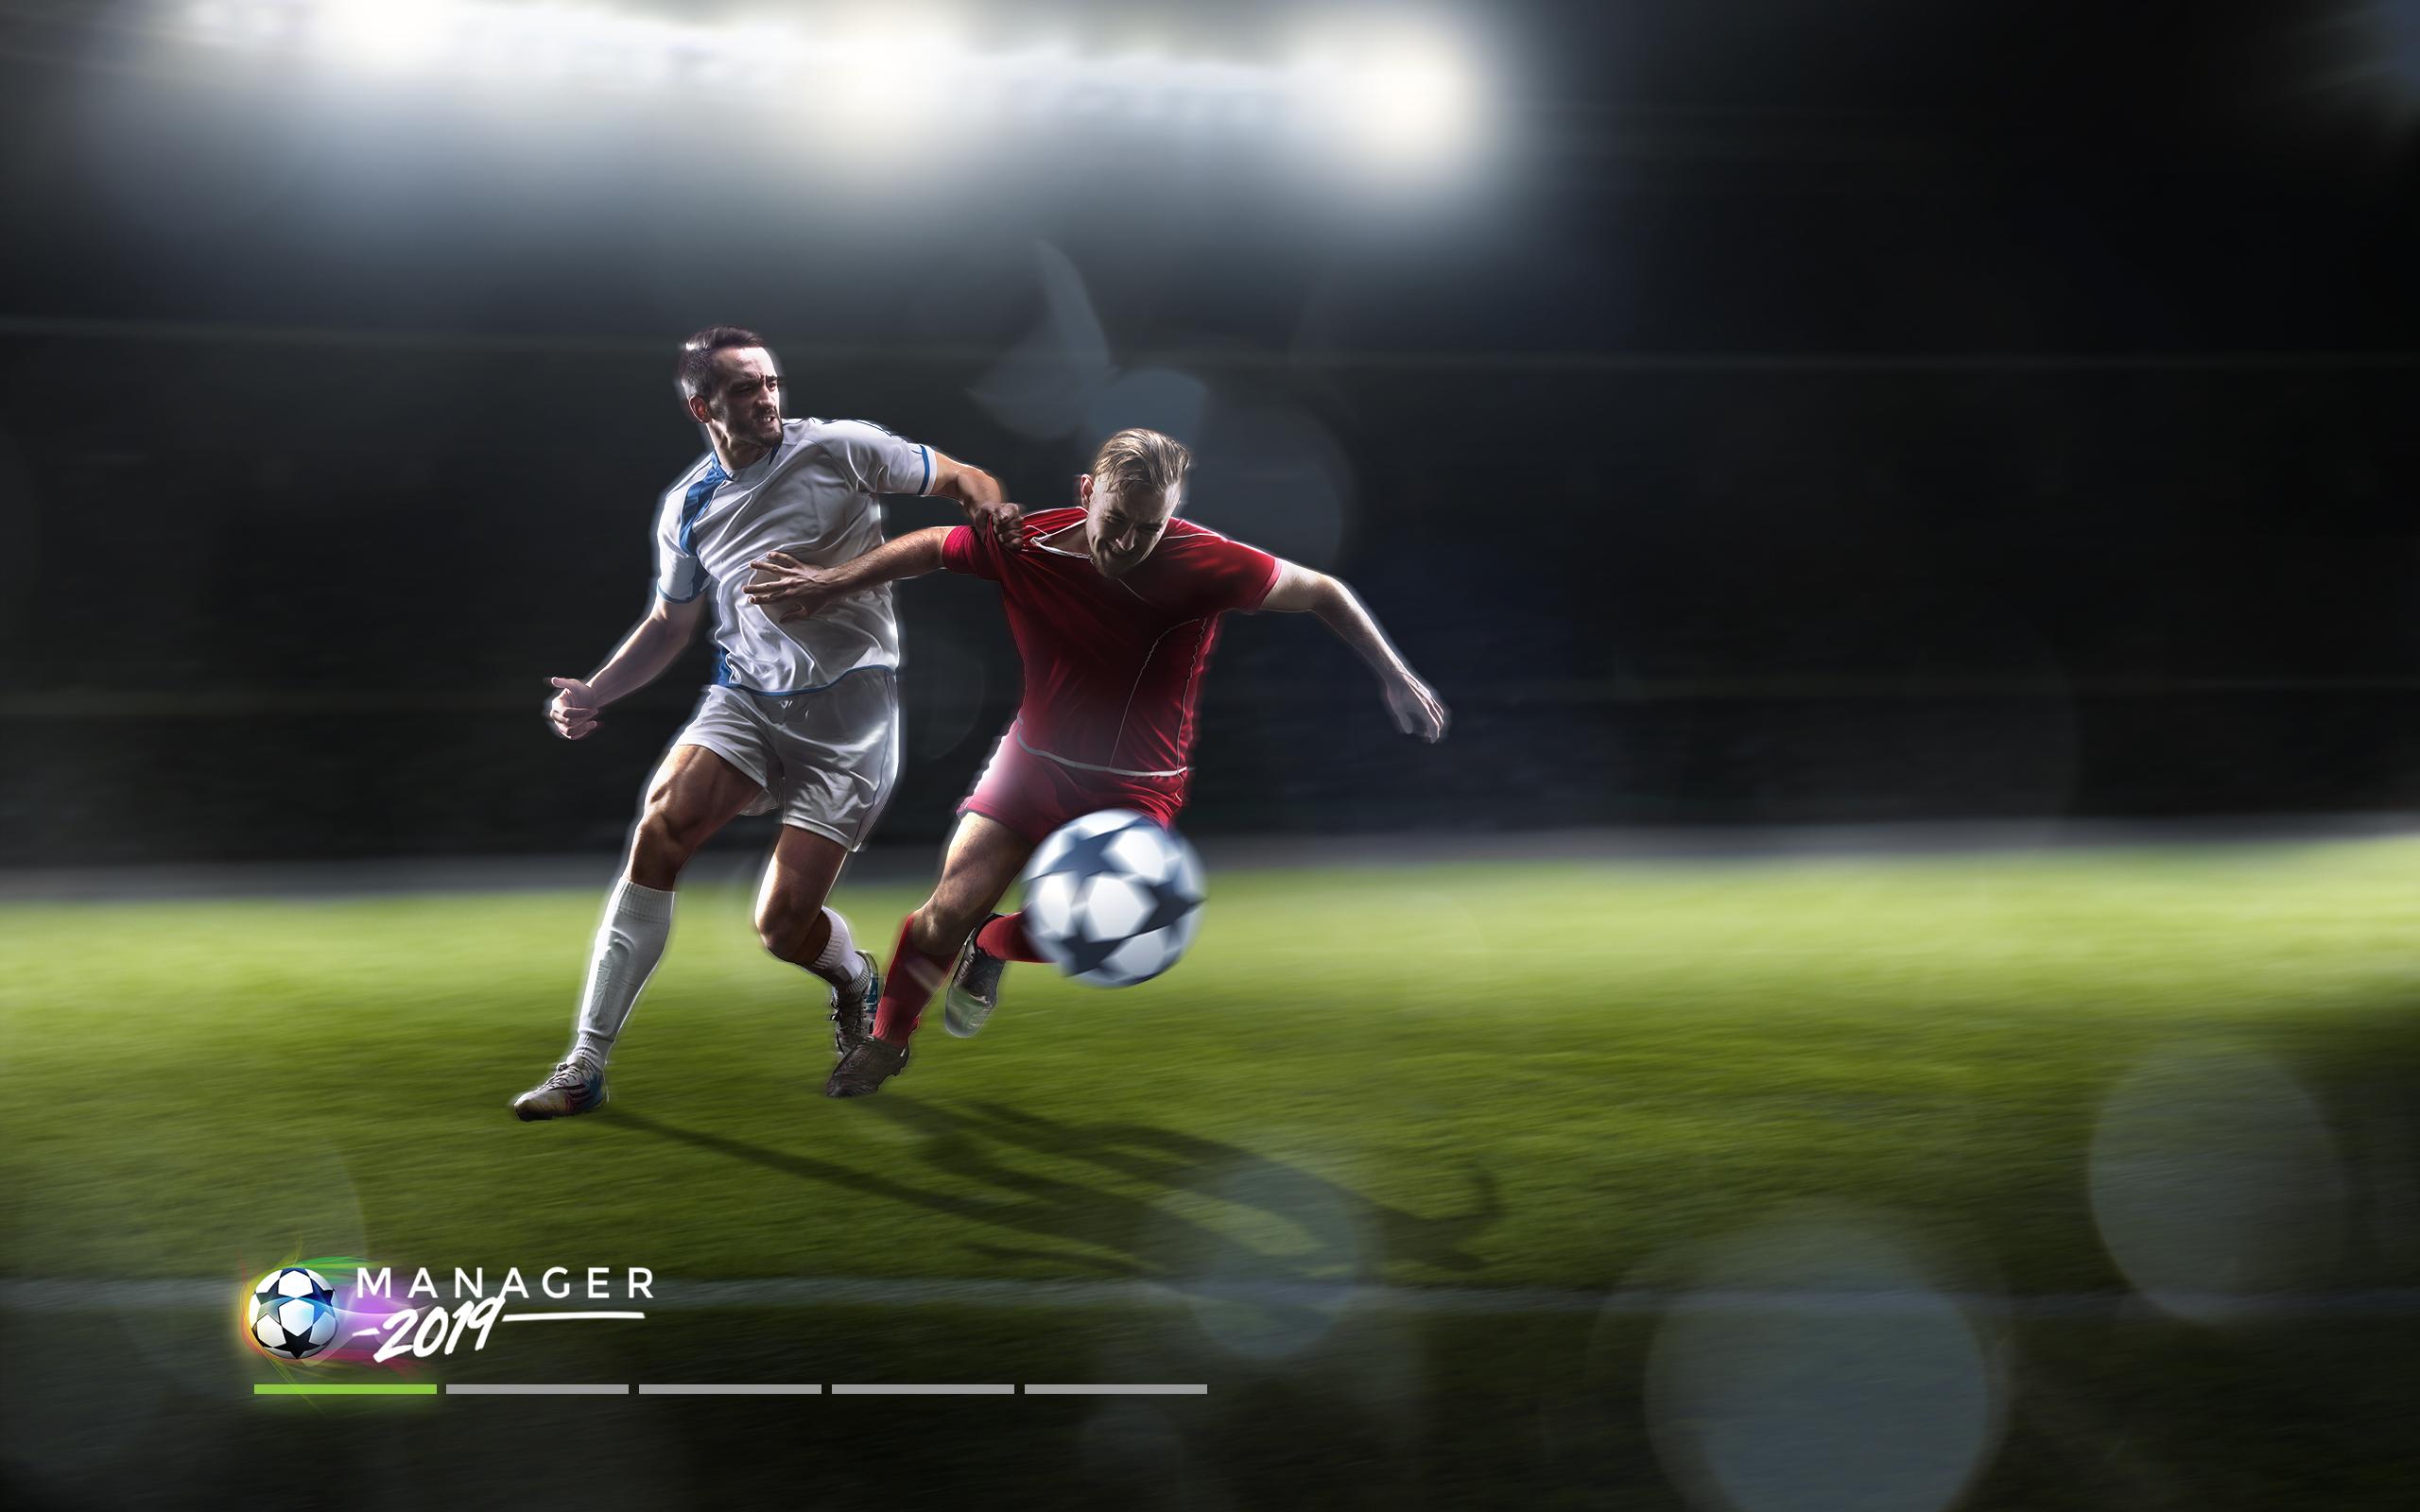 Football Management Ultra 2021 - Manager Game for Android - APK Download